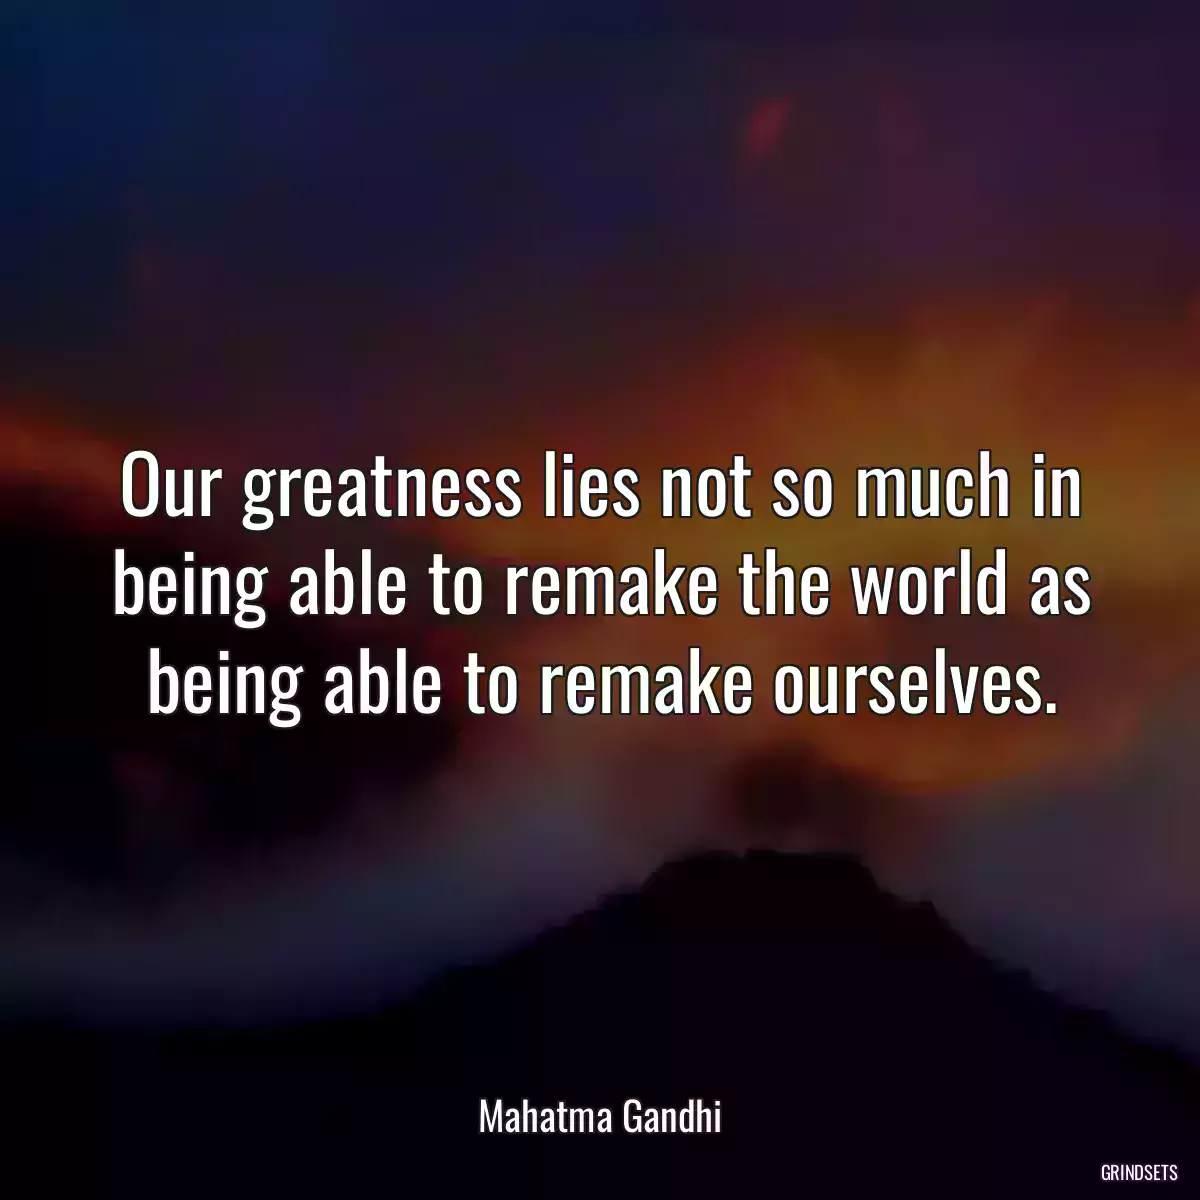 Our greatness lies not so much in being able to remake the world as being able to remake ourselves.